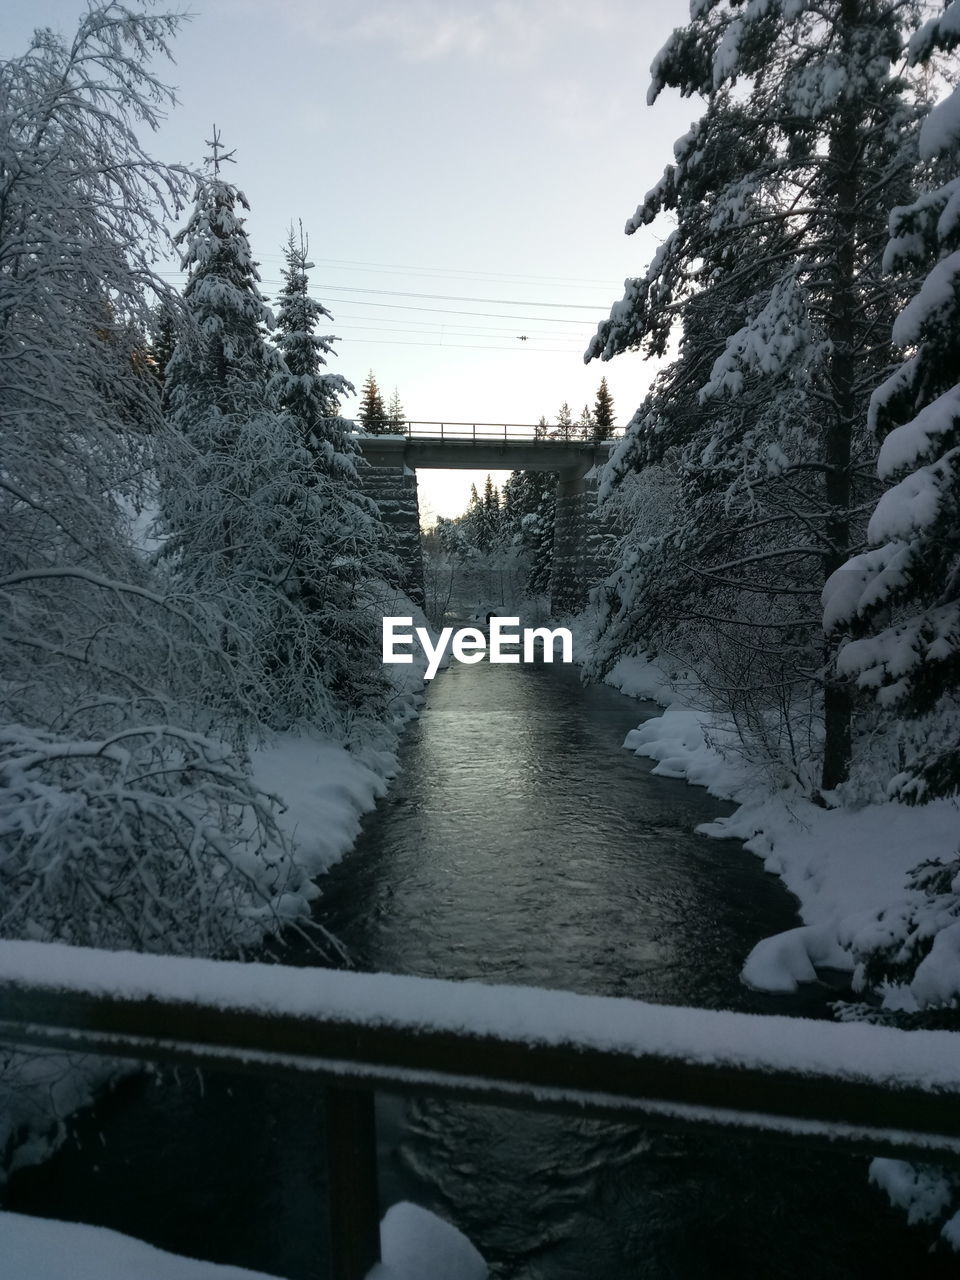 RIVER AMIDST SNOW COVERED TREES AGAINST SKY